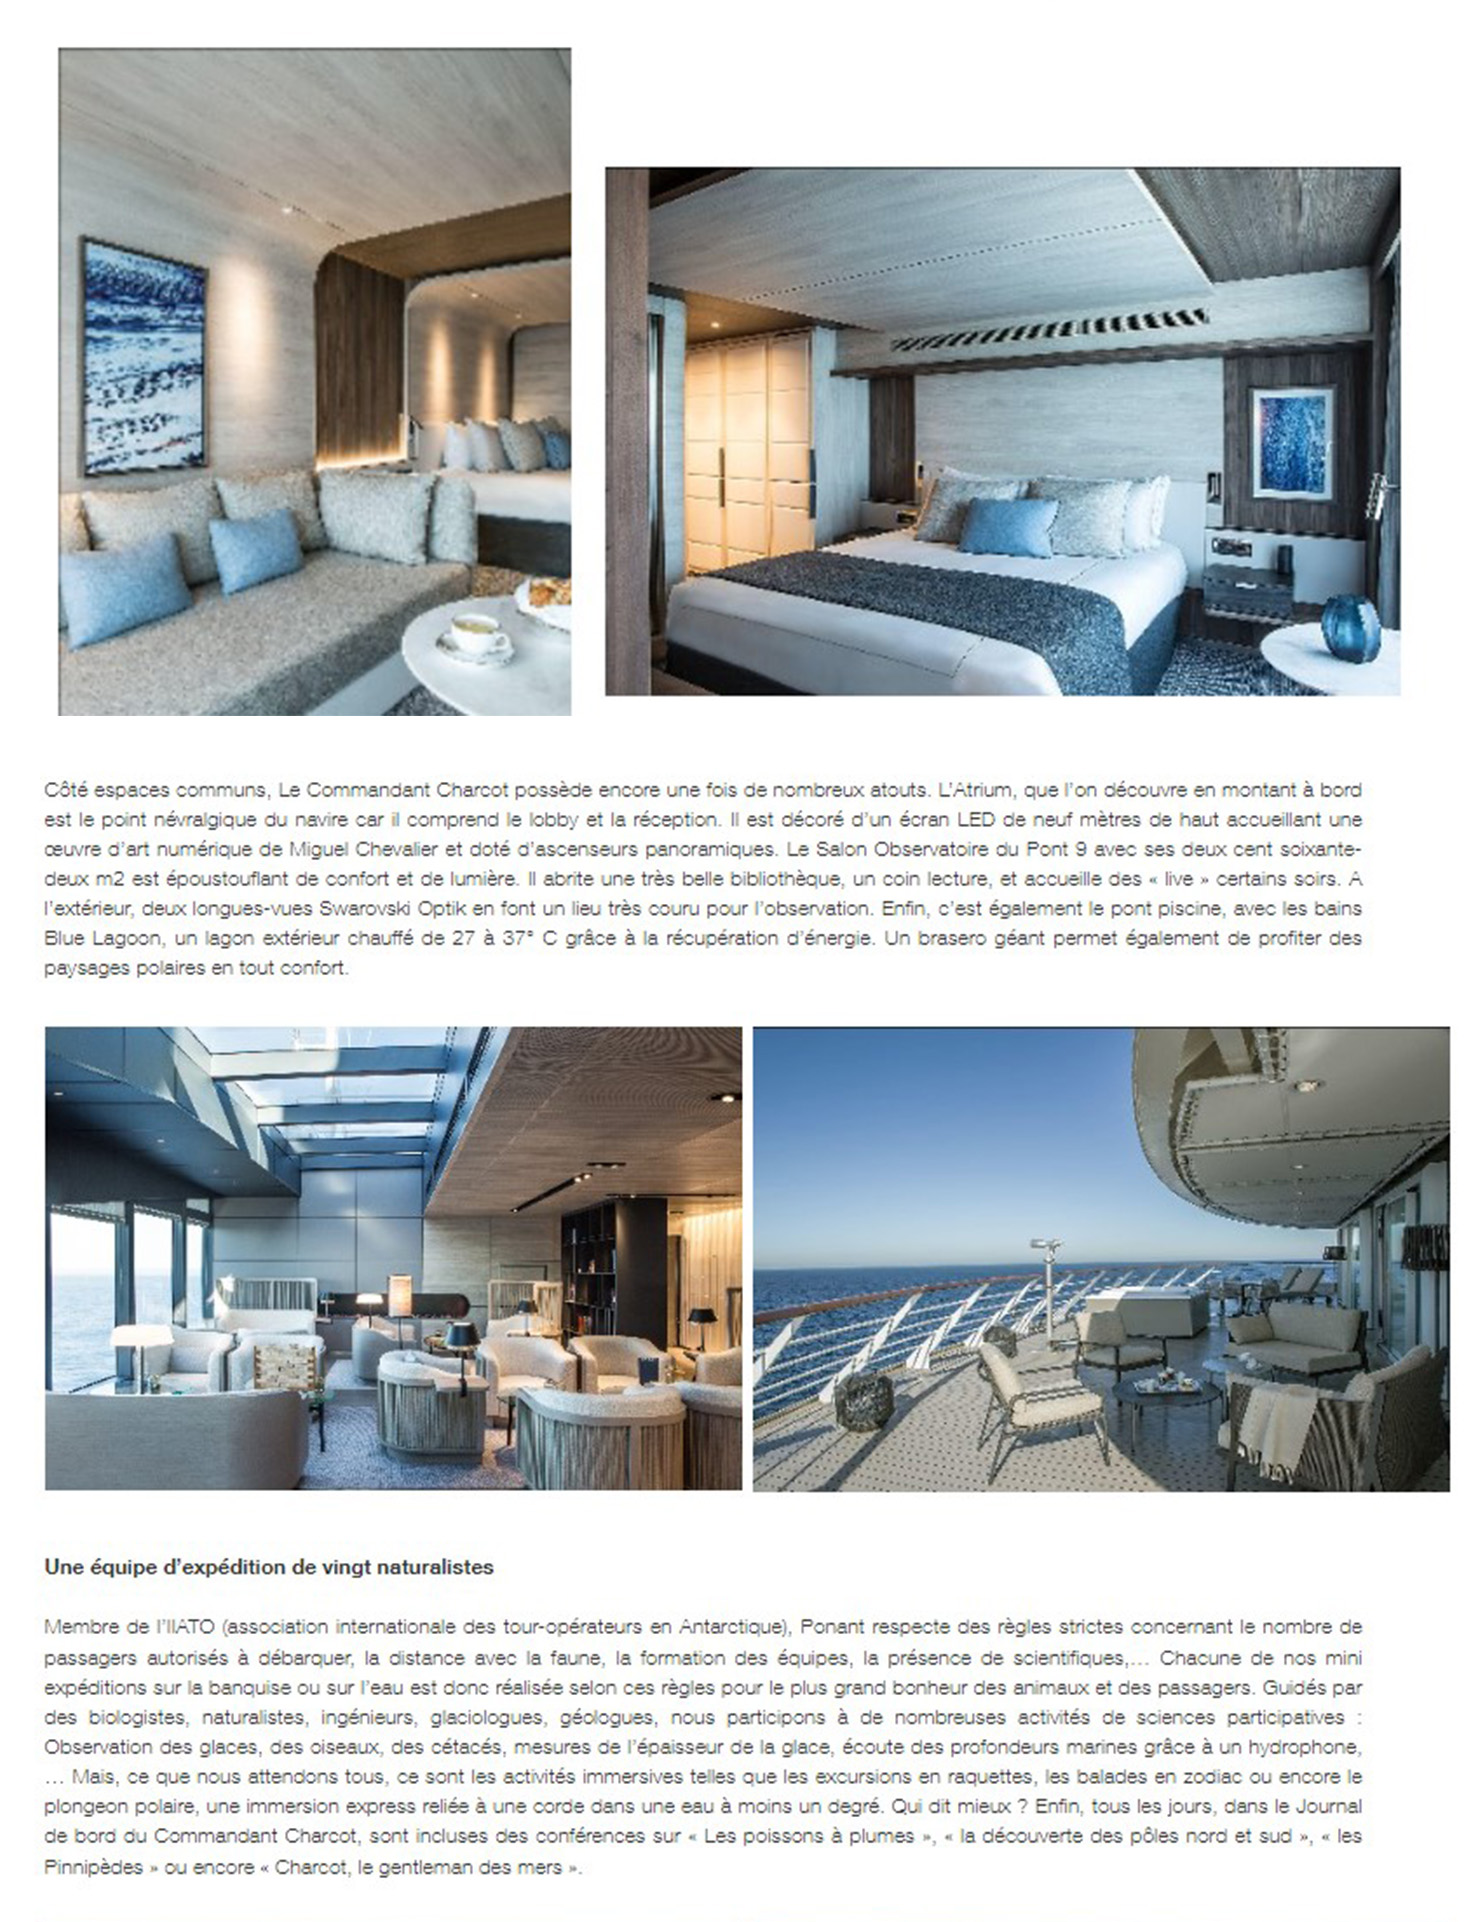 Article from the webmagazine Attitude luxe on the Commandant Charcot page 1, on the polar exploration ship with passengers